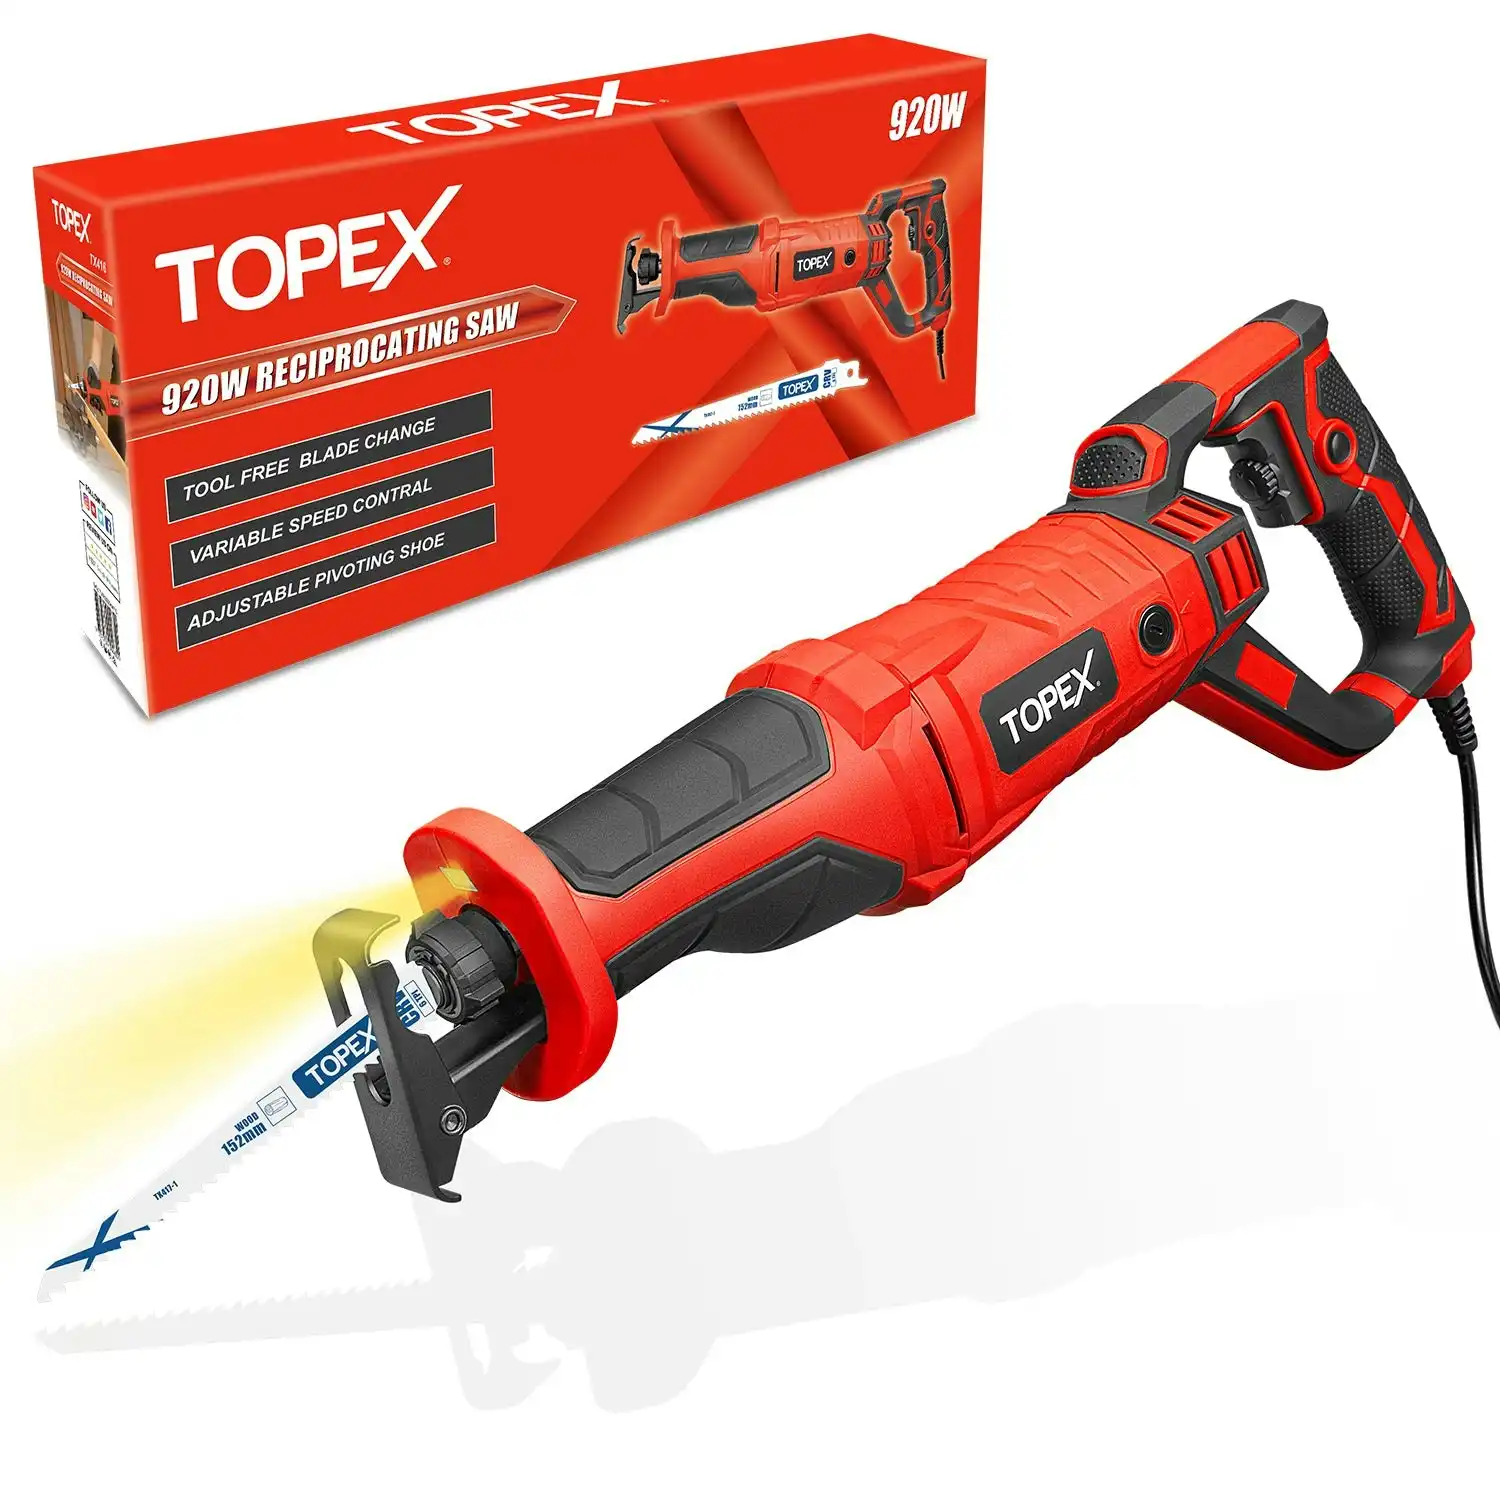 Topex Reciprocating Saw, 920W Quickly Cut Depth in Wood and Metal Cutting, 22mm Stroke Length